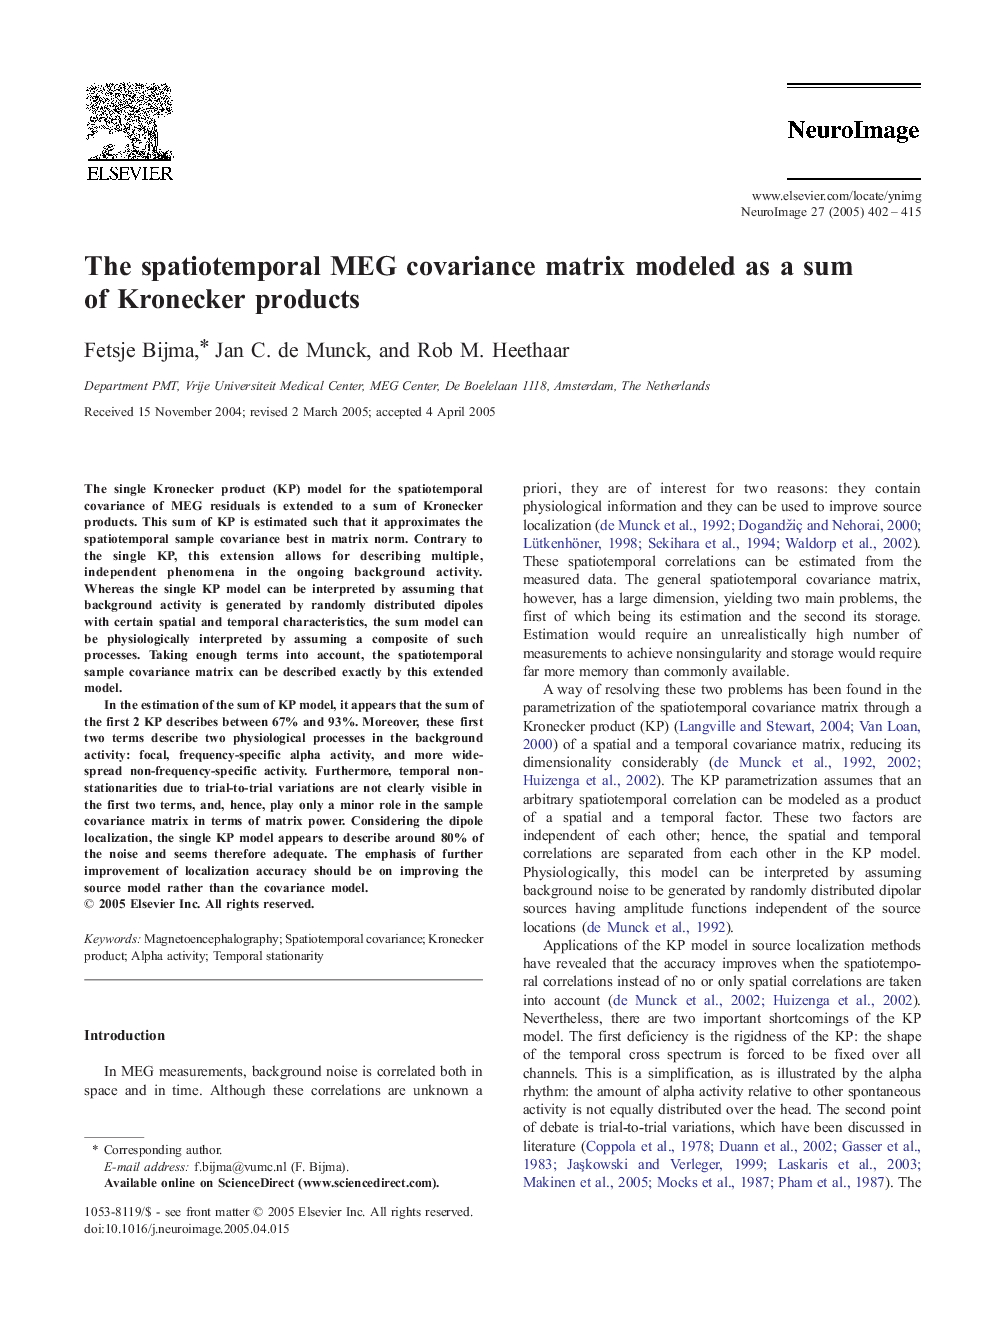 The spatiotemporal MEG covariance matrix modeled as a sum of Kronecker products